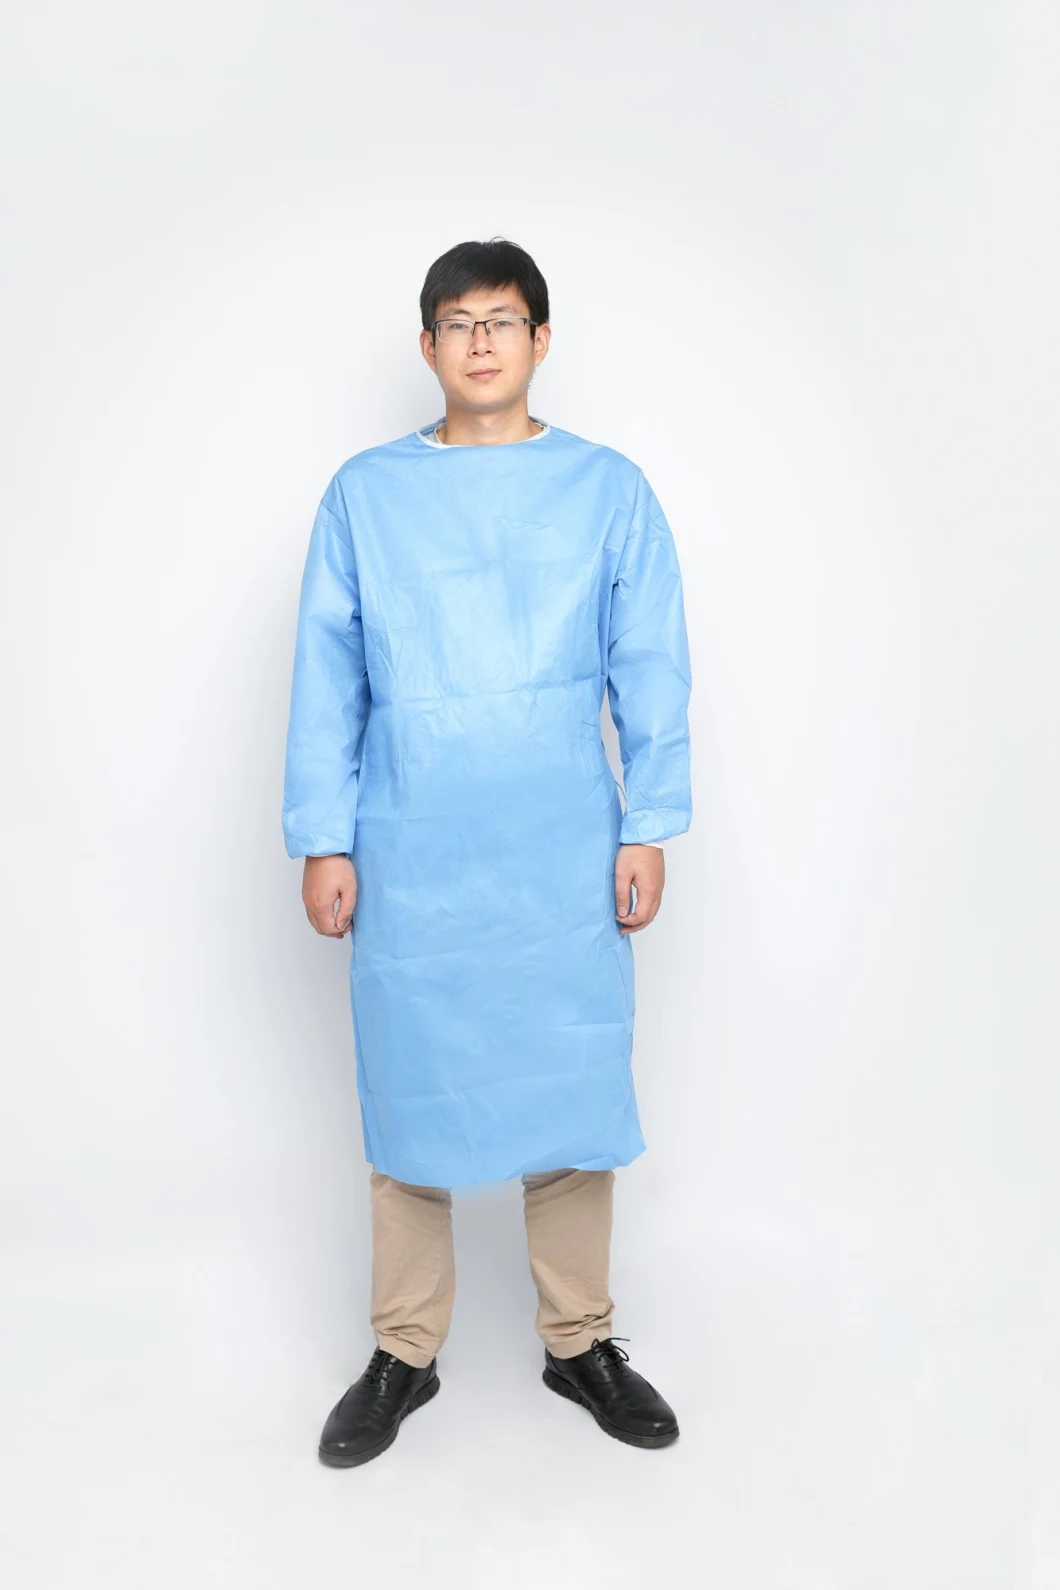 Knitted Cuffs Operation Nonwoven Disposable Medical Operation SMS Isolation Surgical Gown for Hospital/Work out